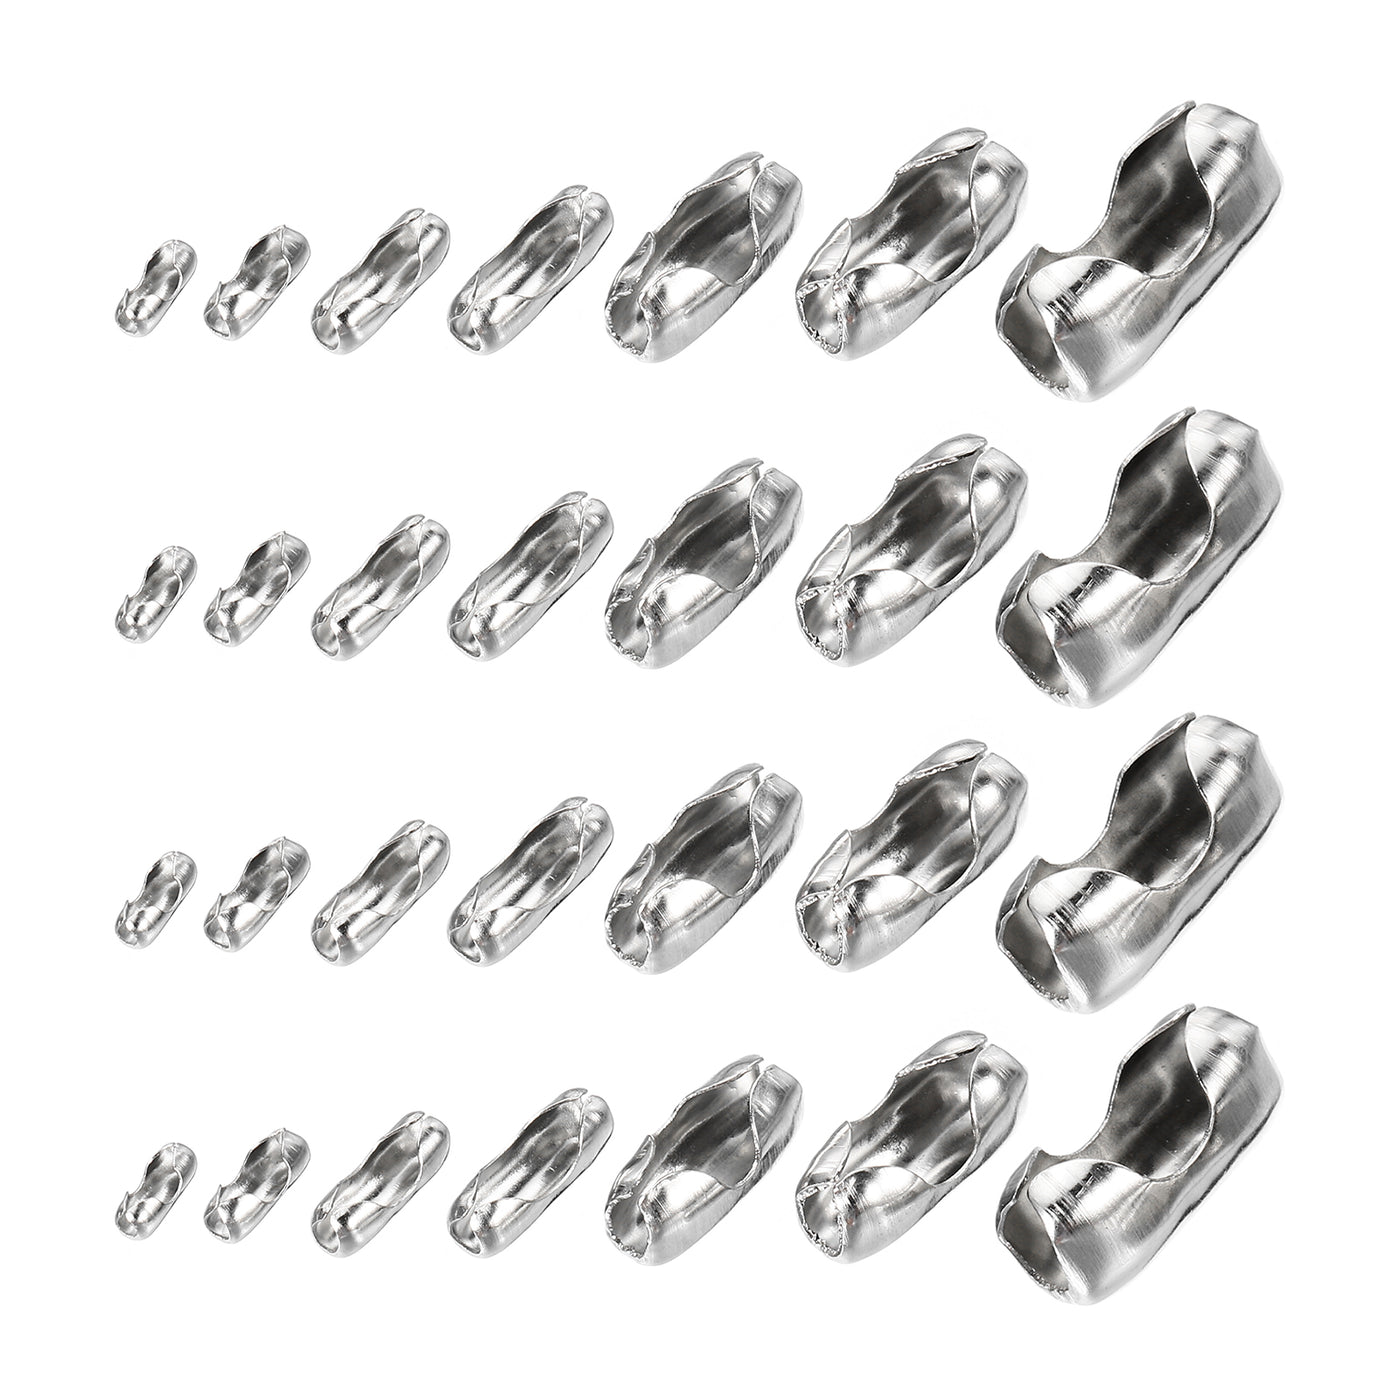 Harfington Ball Chain Connector Clasps, Stainless Steel Replacement Cord Connector Fit for 1.5/2/2.4/3.2/4.5/5/6mm Beaded Ball Chain, Silver Pack of 140